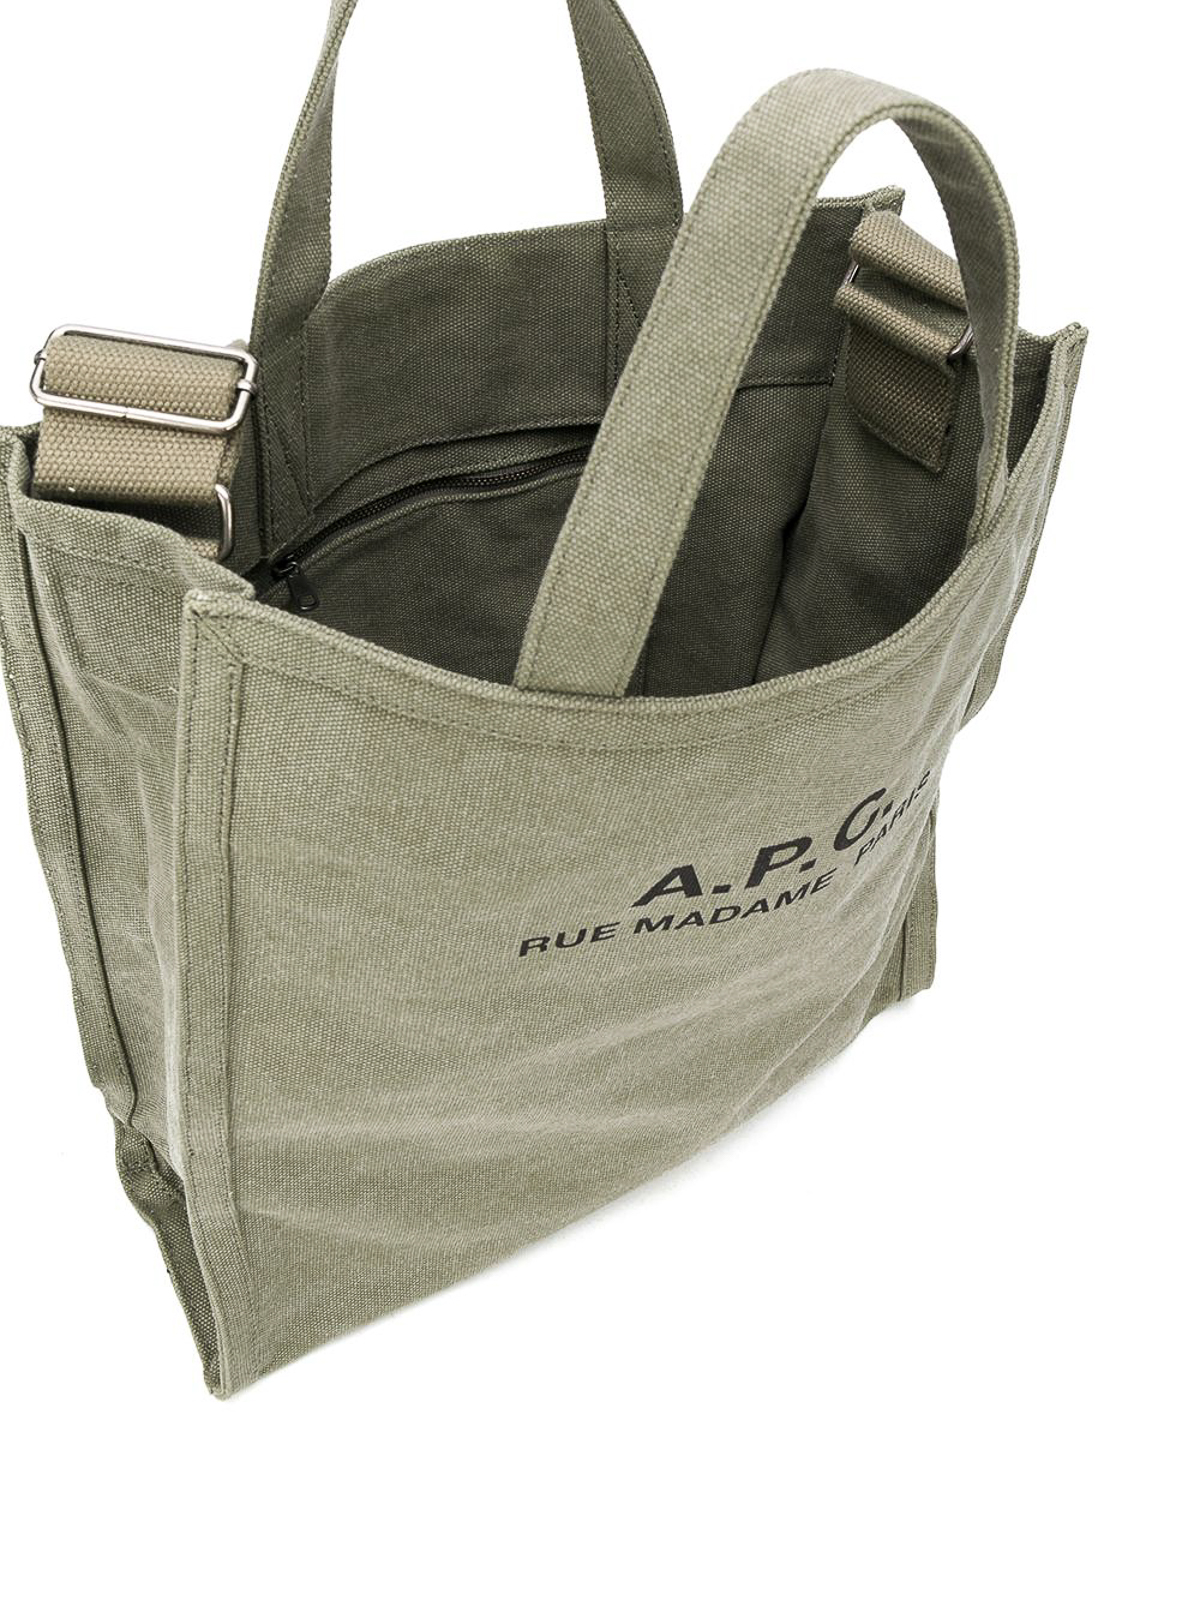 A.p.c. tote bags for Women